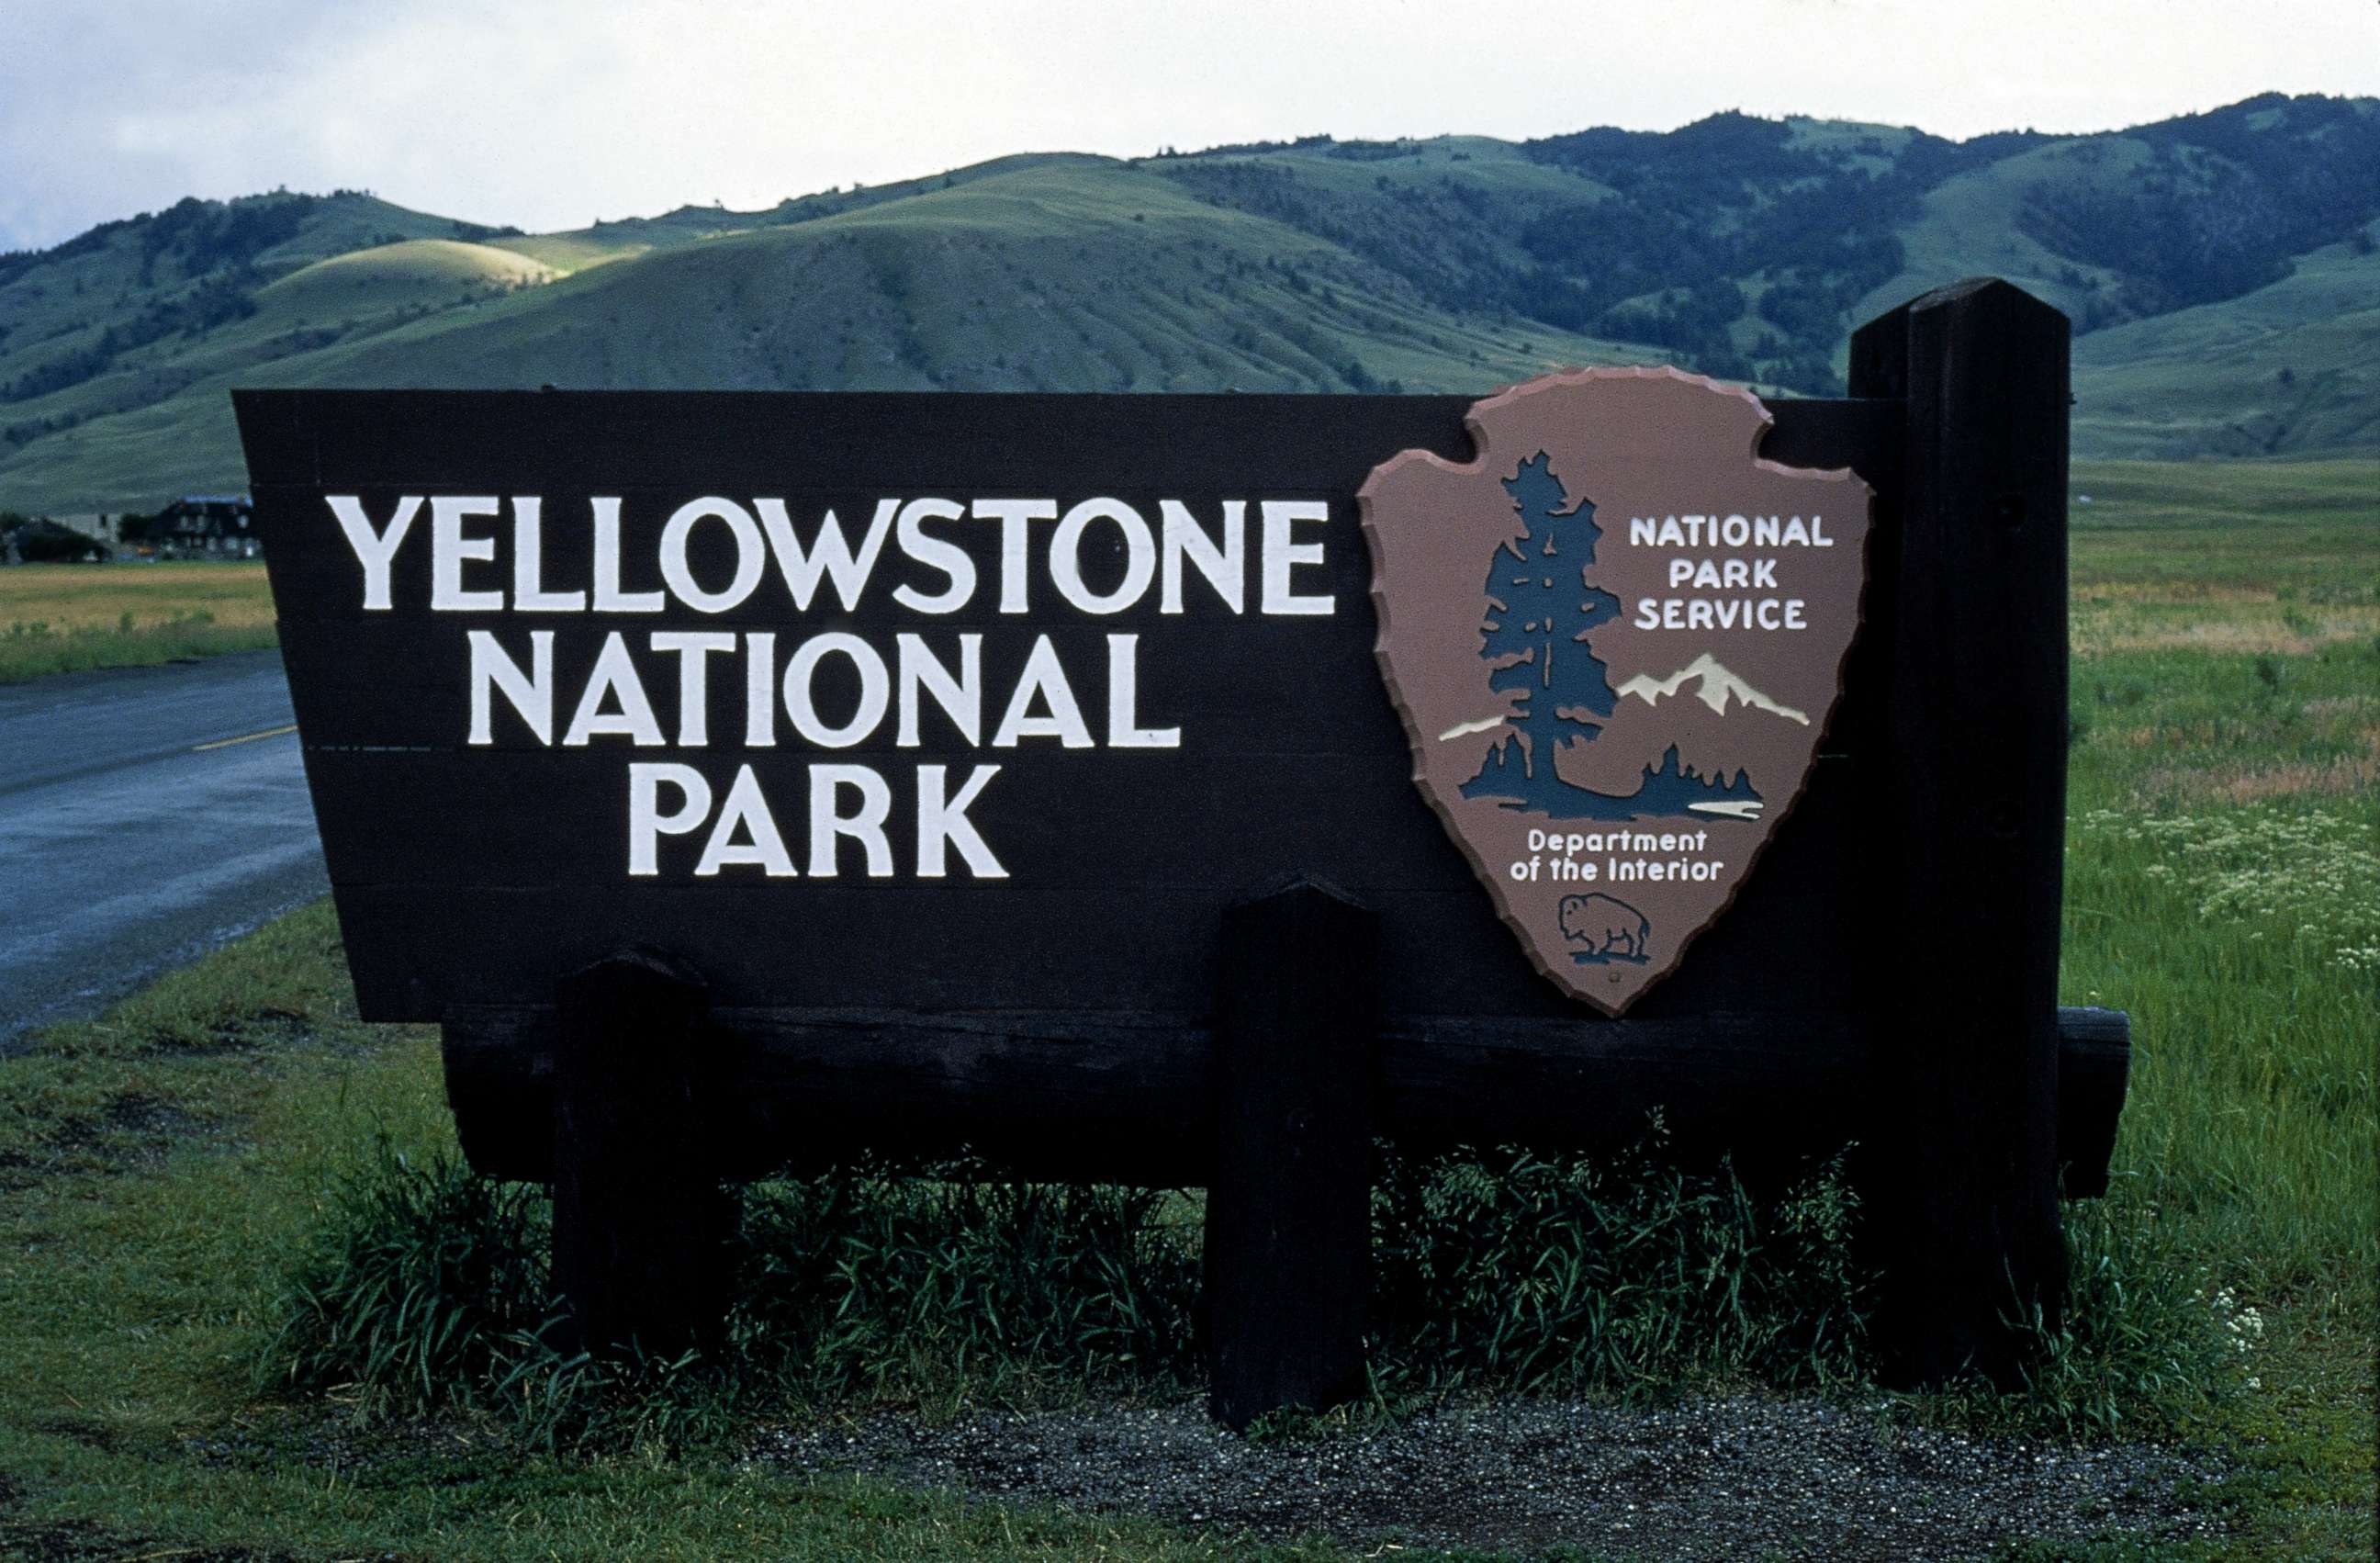 PHOTO: A sign for Yellowstone National Park in Wyoming is seen in this file photo.